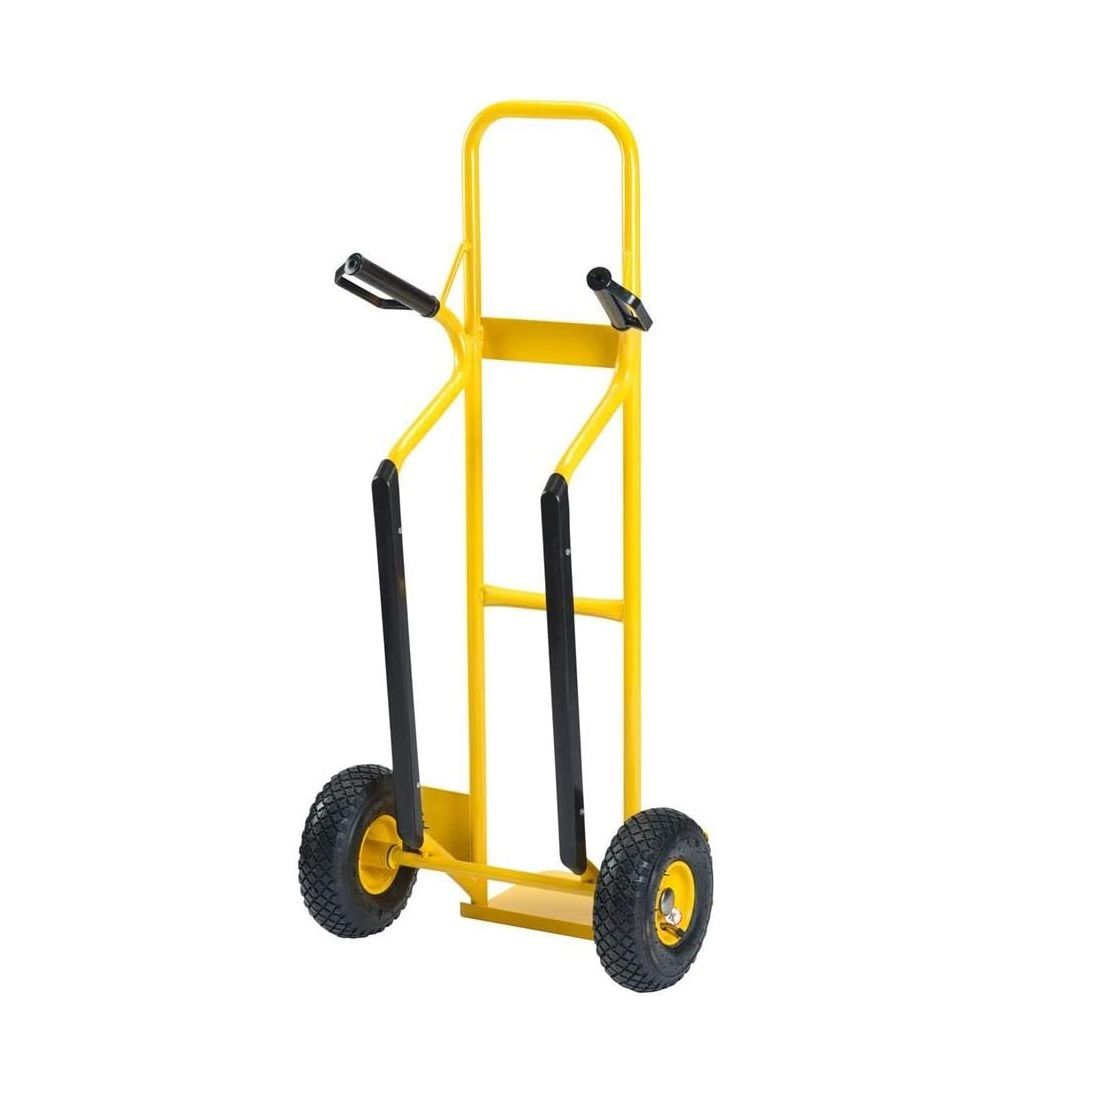 Stanley Steel Hand Truck 250Kg With Pneumatic Wheels Built-In Guides SXWTC-HT524